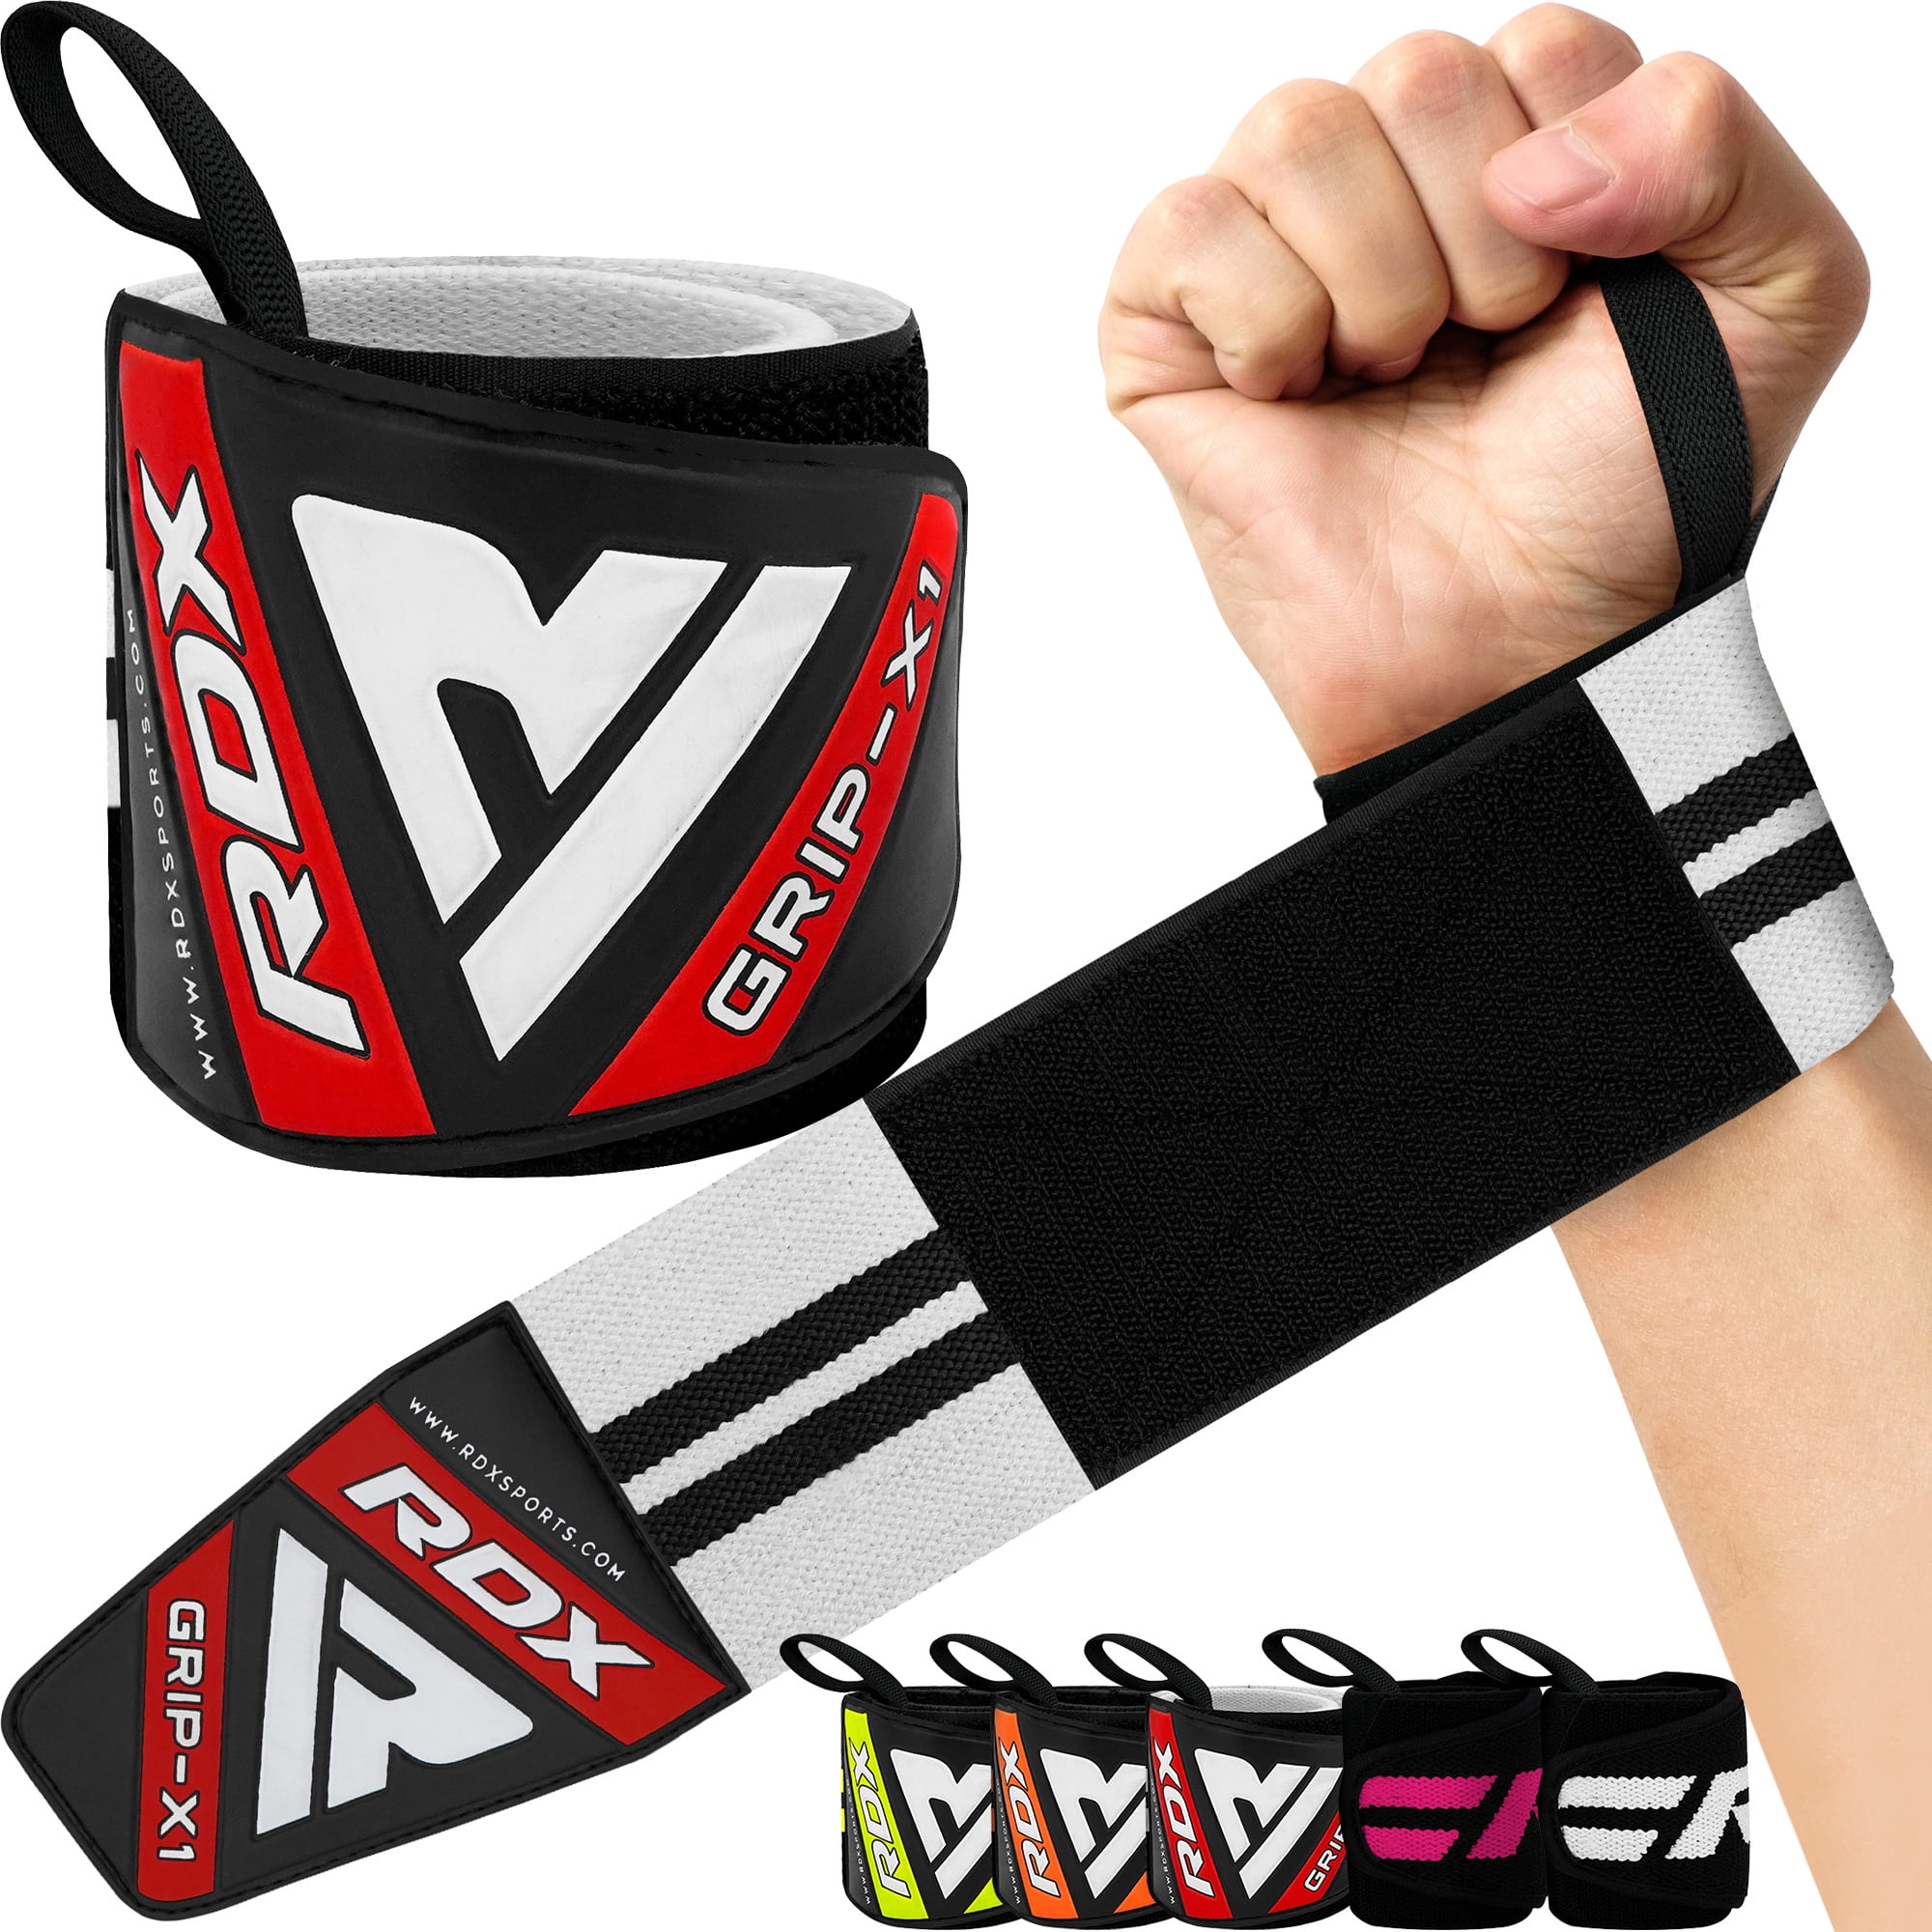 Rip Toned Wrist Wraps for Weightlifting (USPA Approved) 18 Professional  Quality Straps with Ergonomic Thumb Loops - Lifting Wrist Support Braces  for Powerlifting, Bodybuilding, Strength Training 